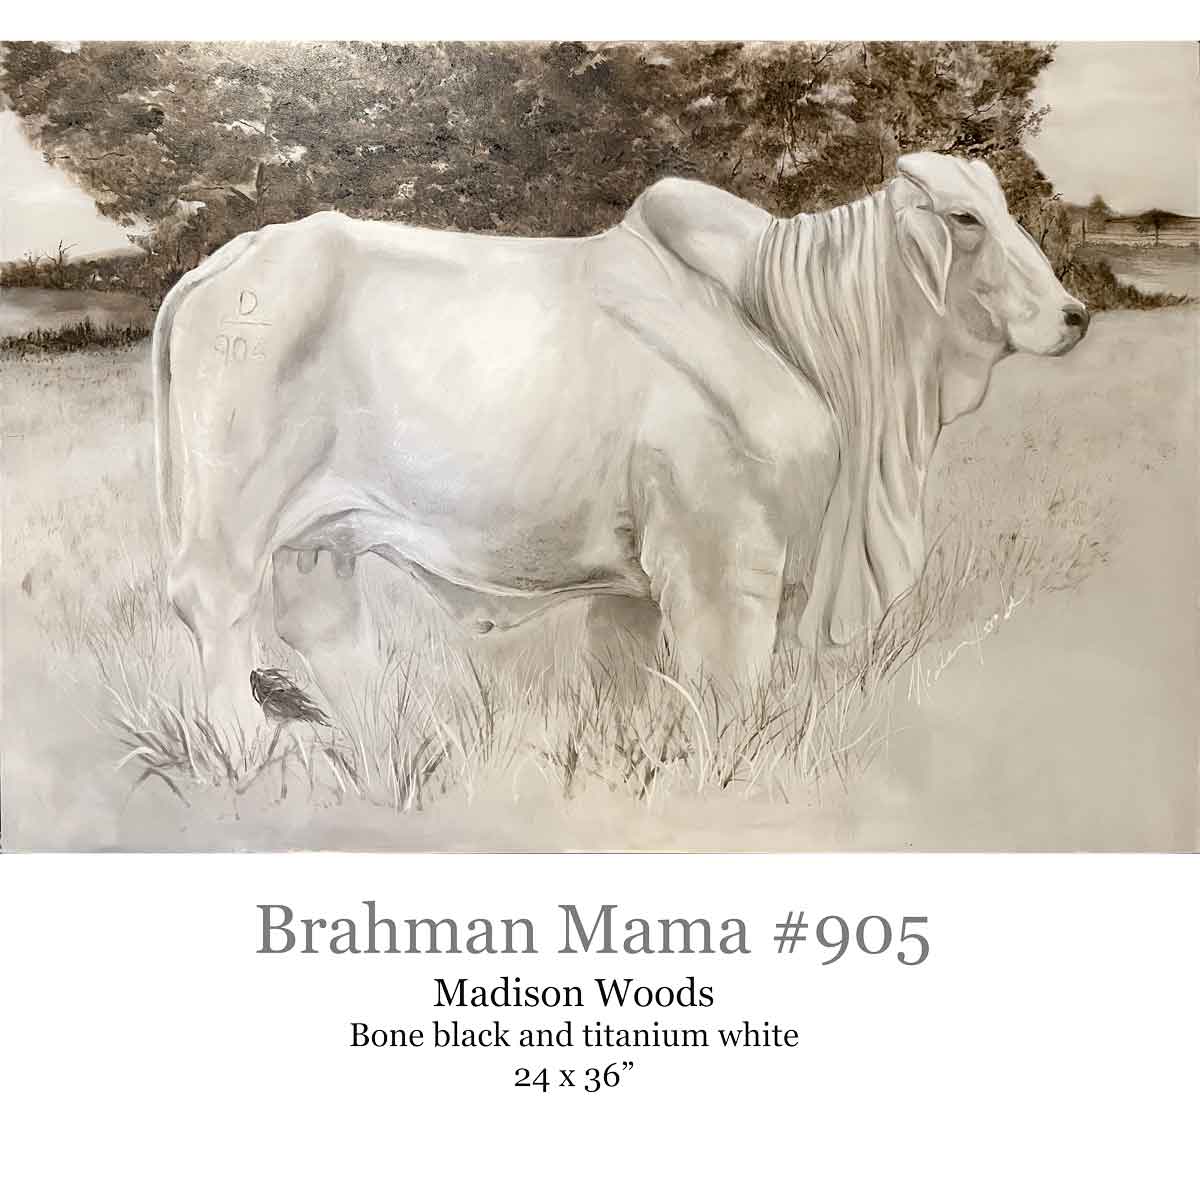 Brahman Mama is the large cow painting I just finished this morning.